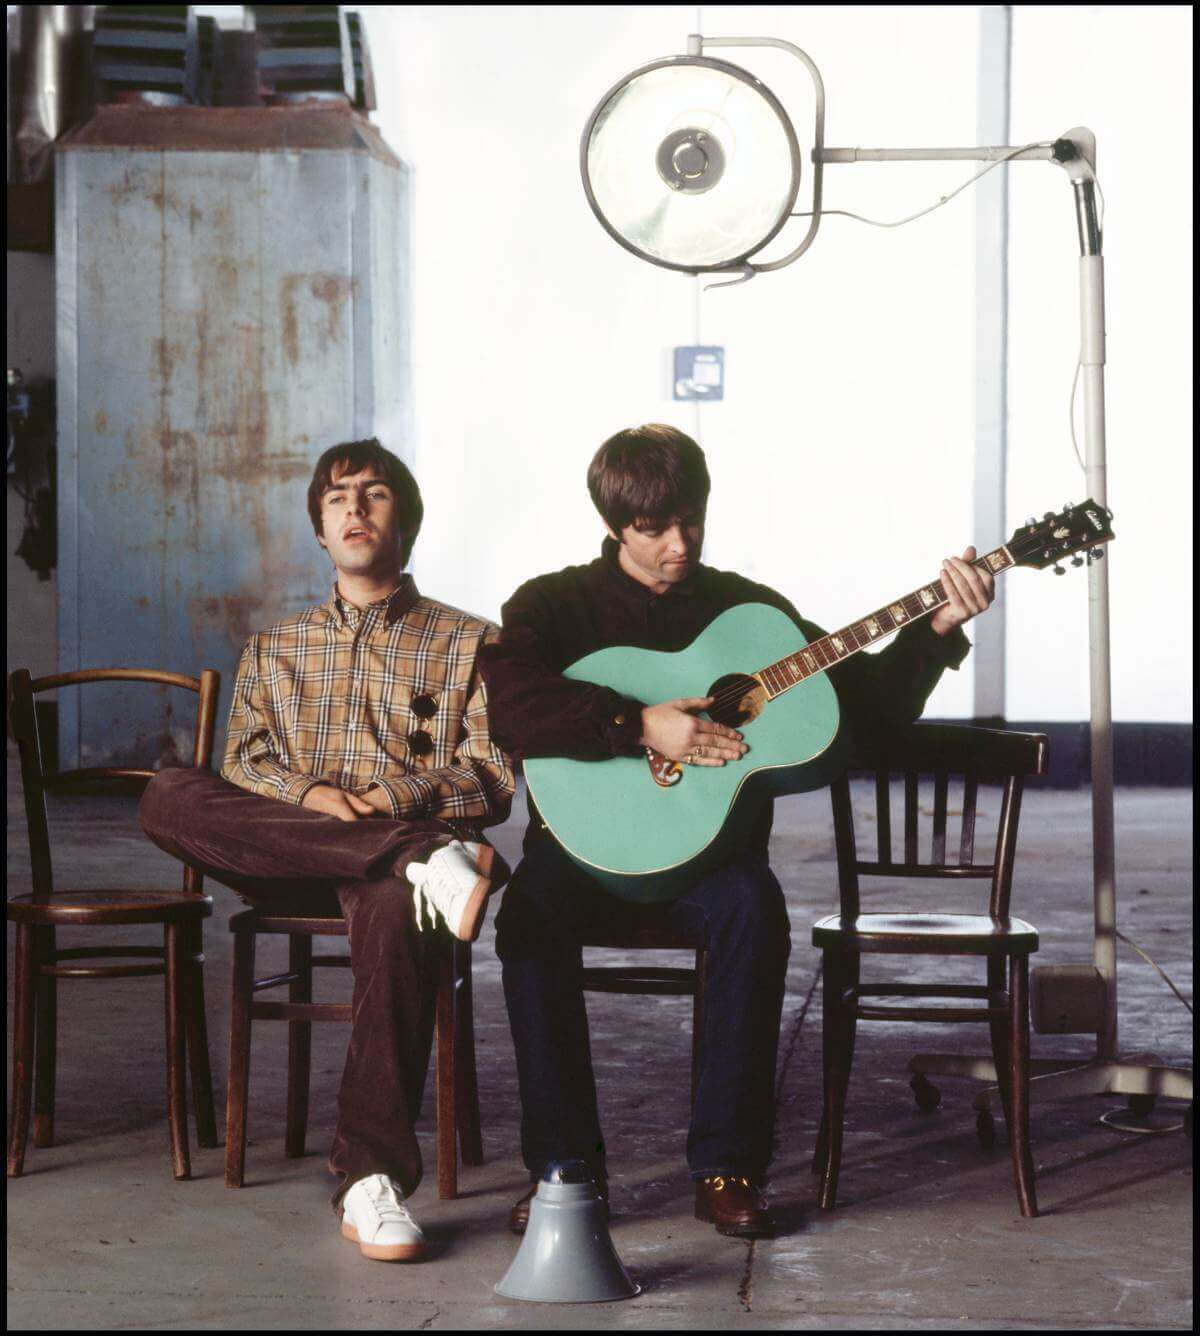 Liam and Noel sitting on 2 of 4 chairs in a row in a warehouse style setting, Noel in playing a guitar while Liam sings, a megaphone rests on the floor in front of them